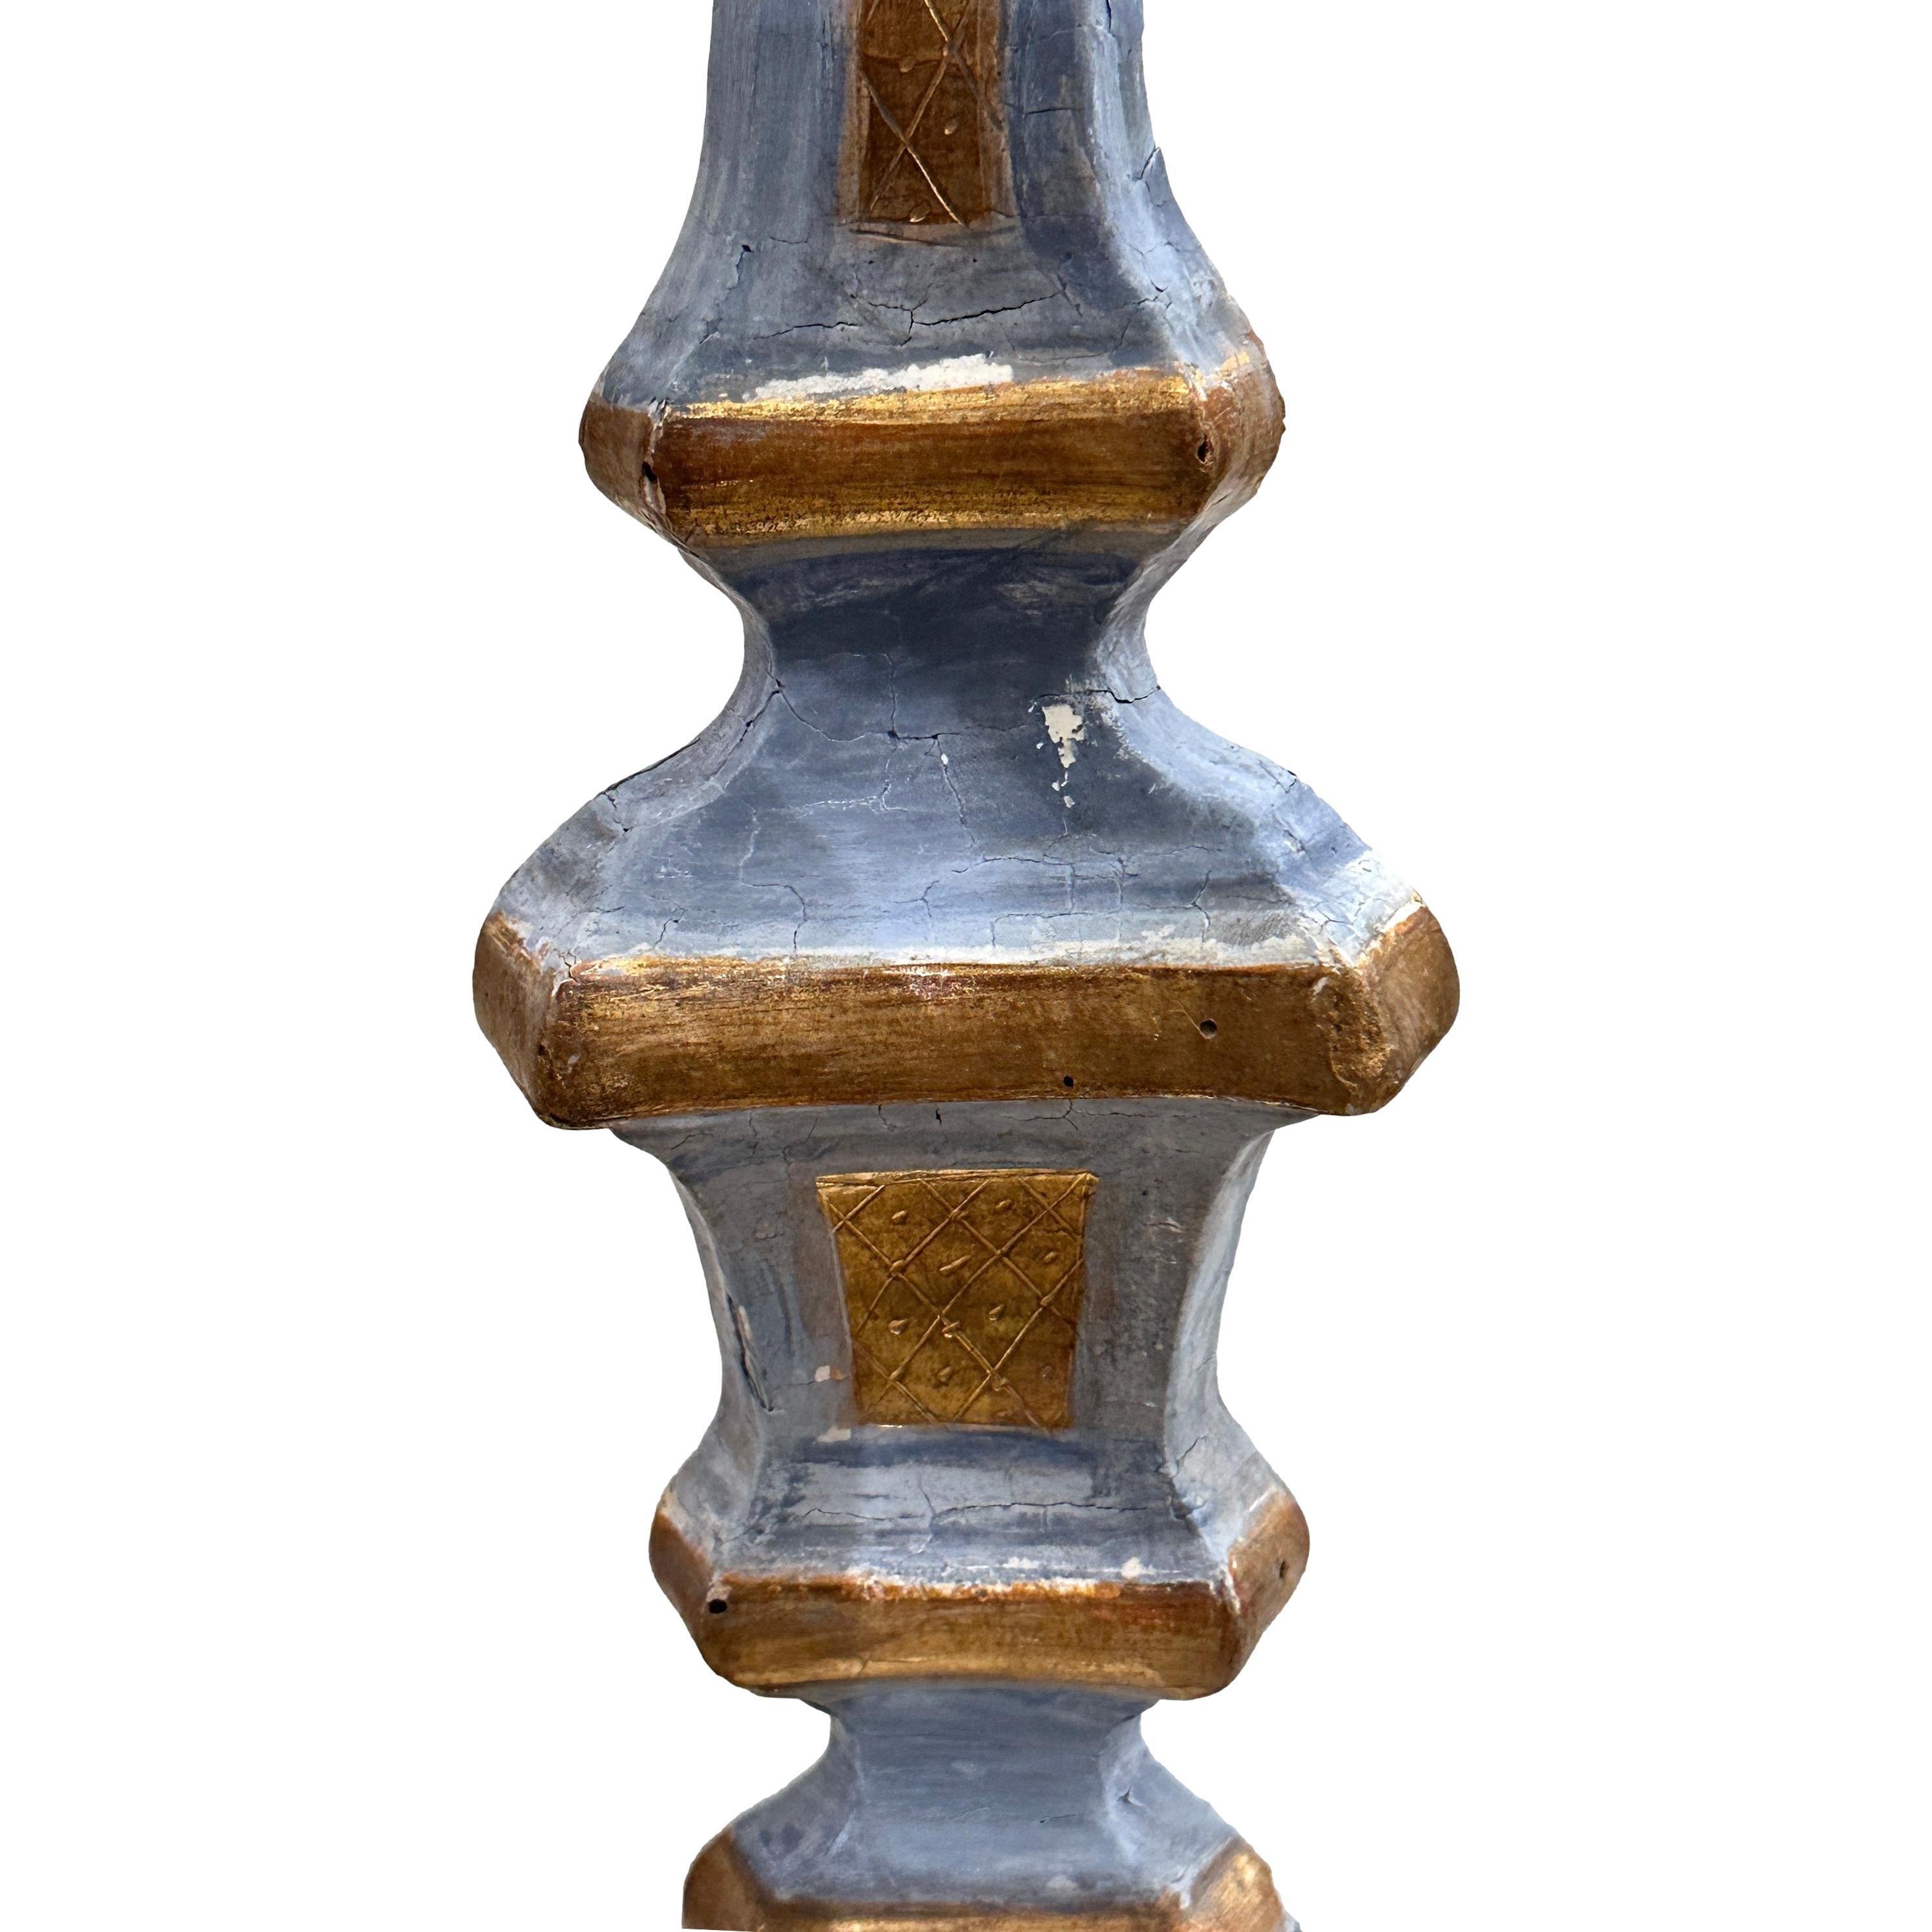 A pair of Italian 19th century candlesticks with original patina.

Measurements:
Height of body: 22